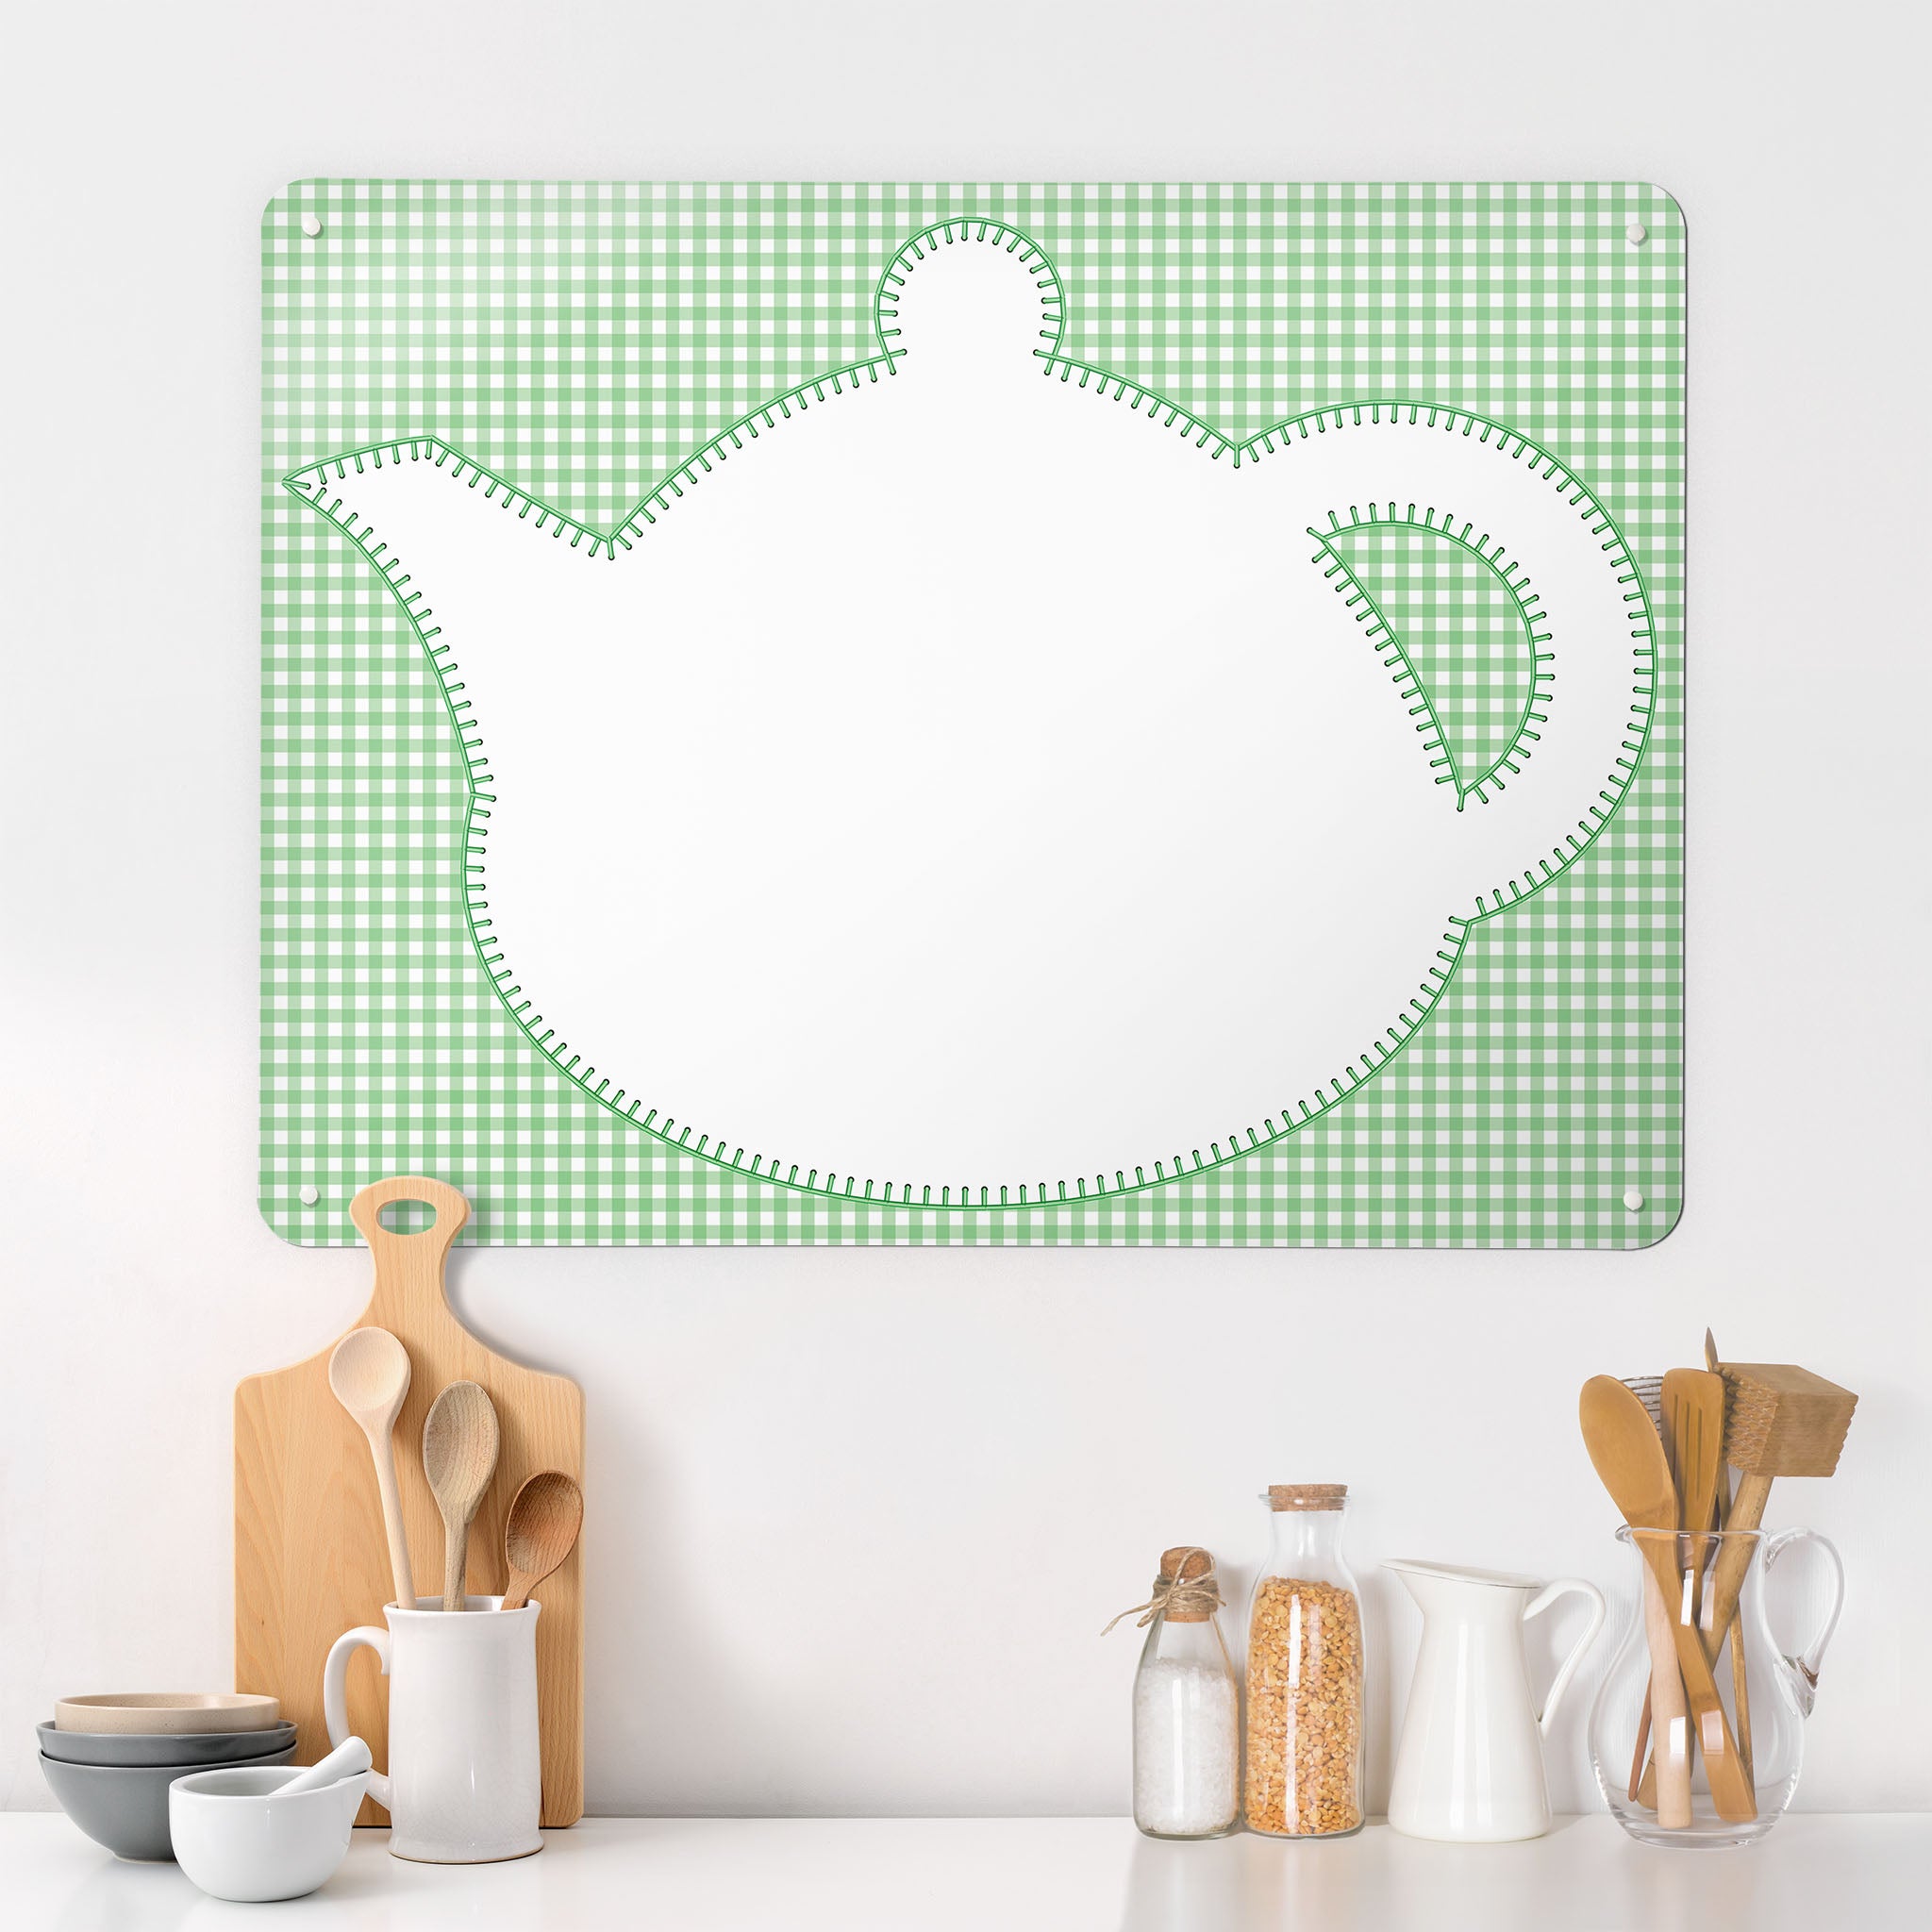 A  kitchen interior with a magnetic metal wall art panel showing an appliqué teapot design in white on a green gingham background